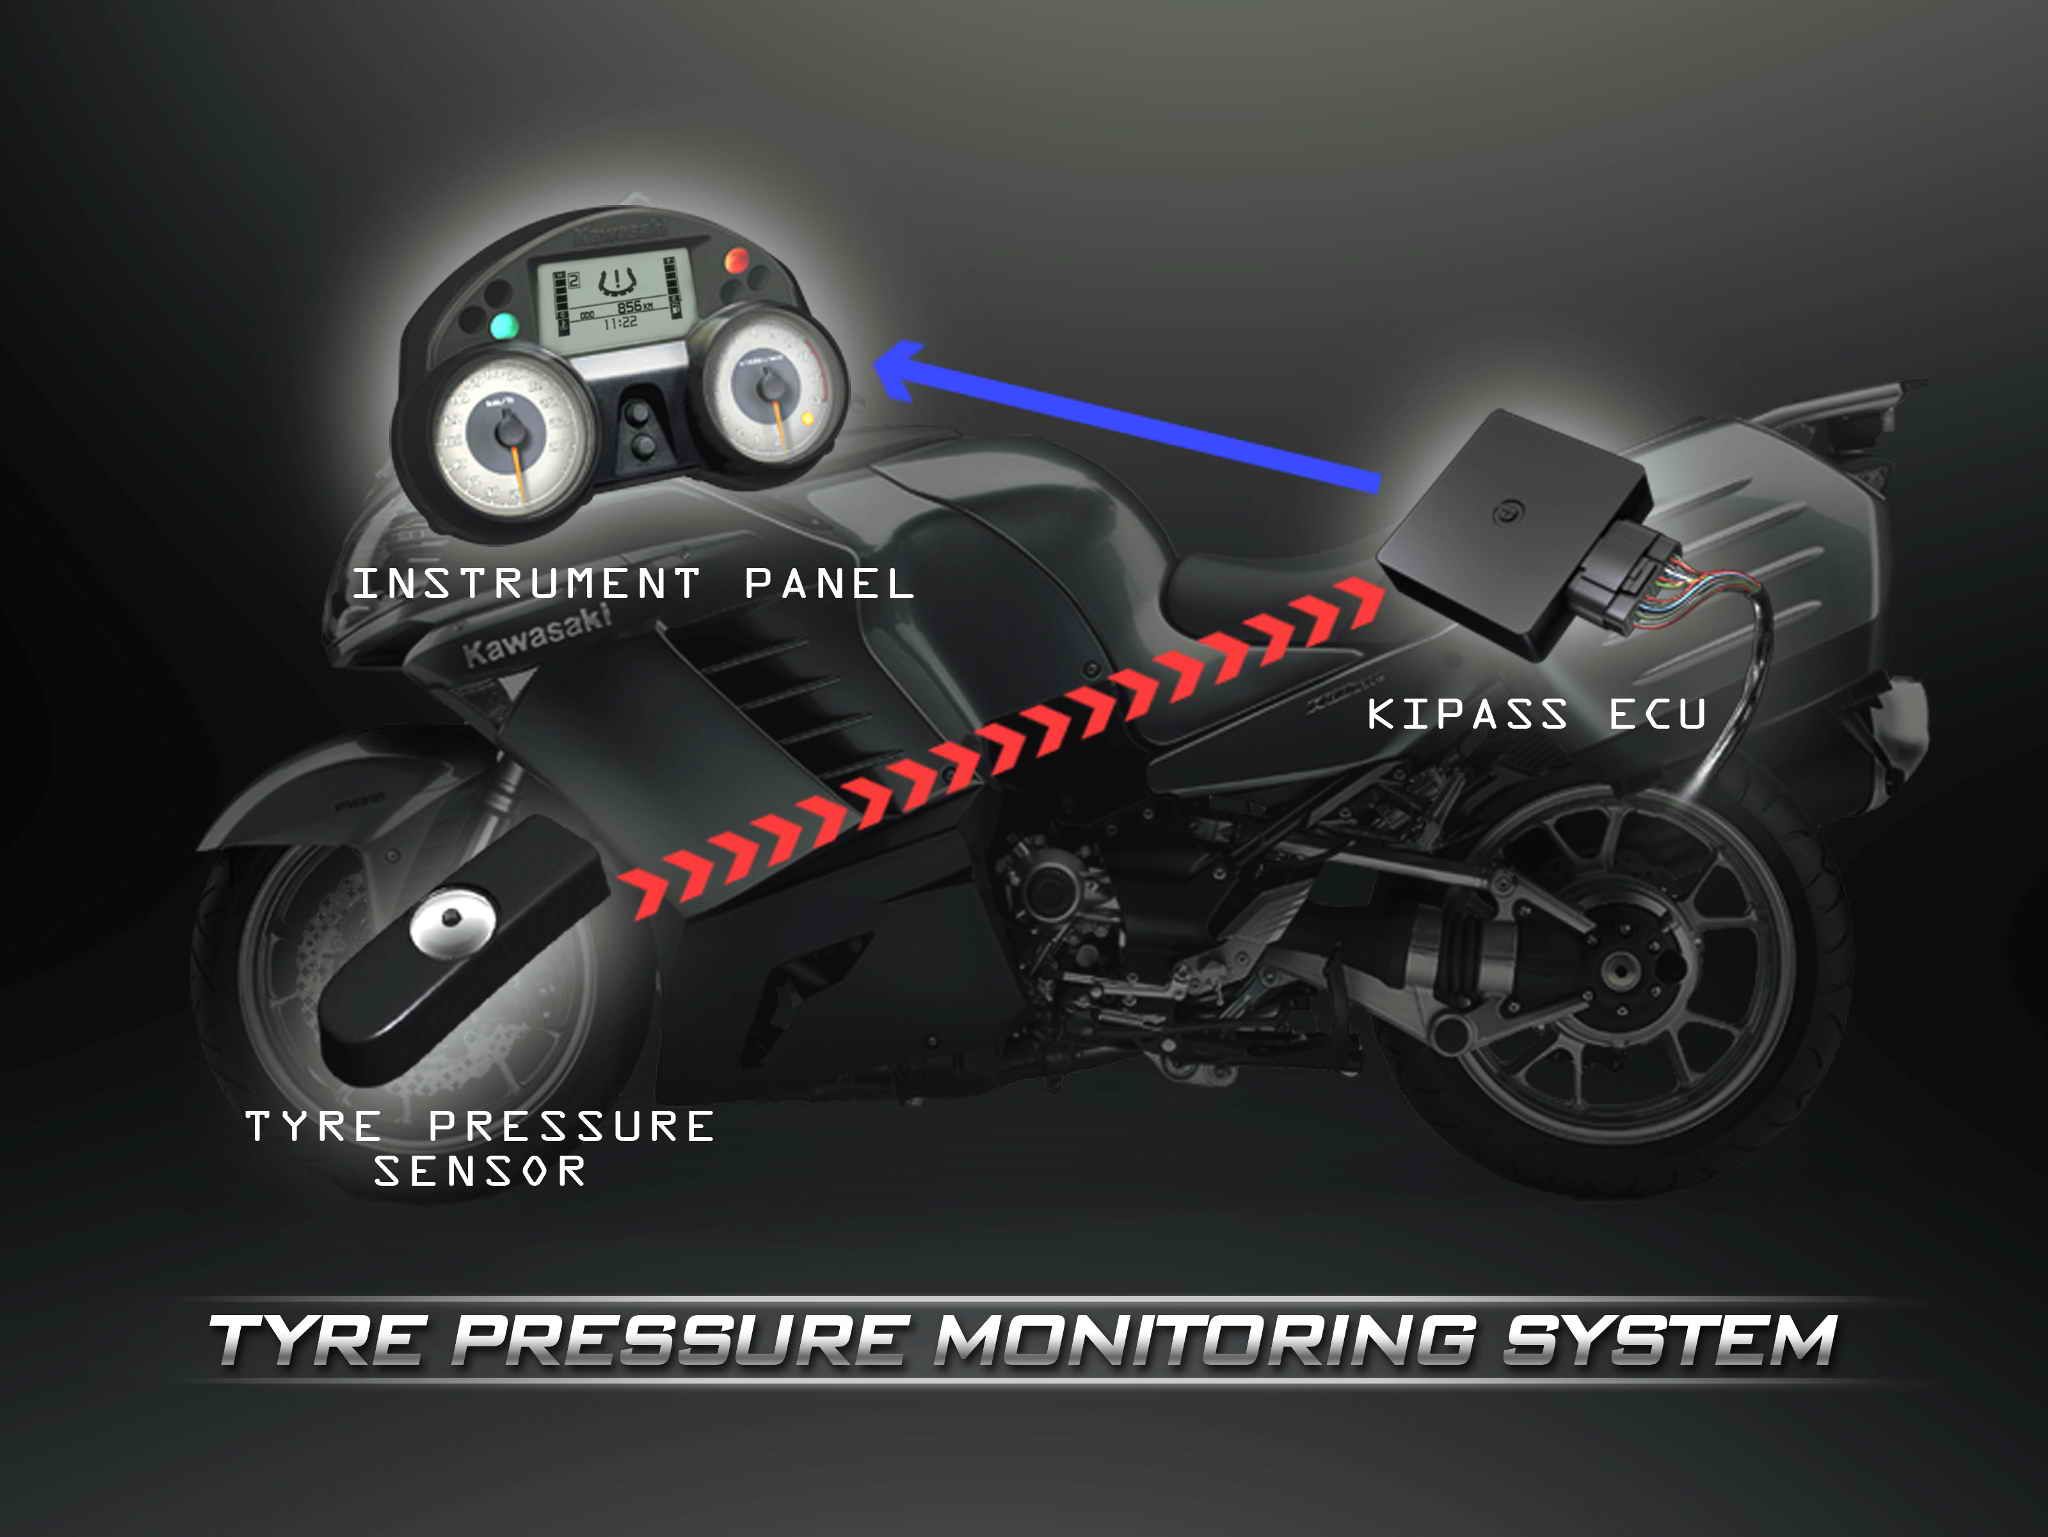 Tyre pressure monitoring system